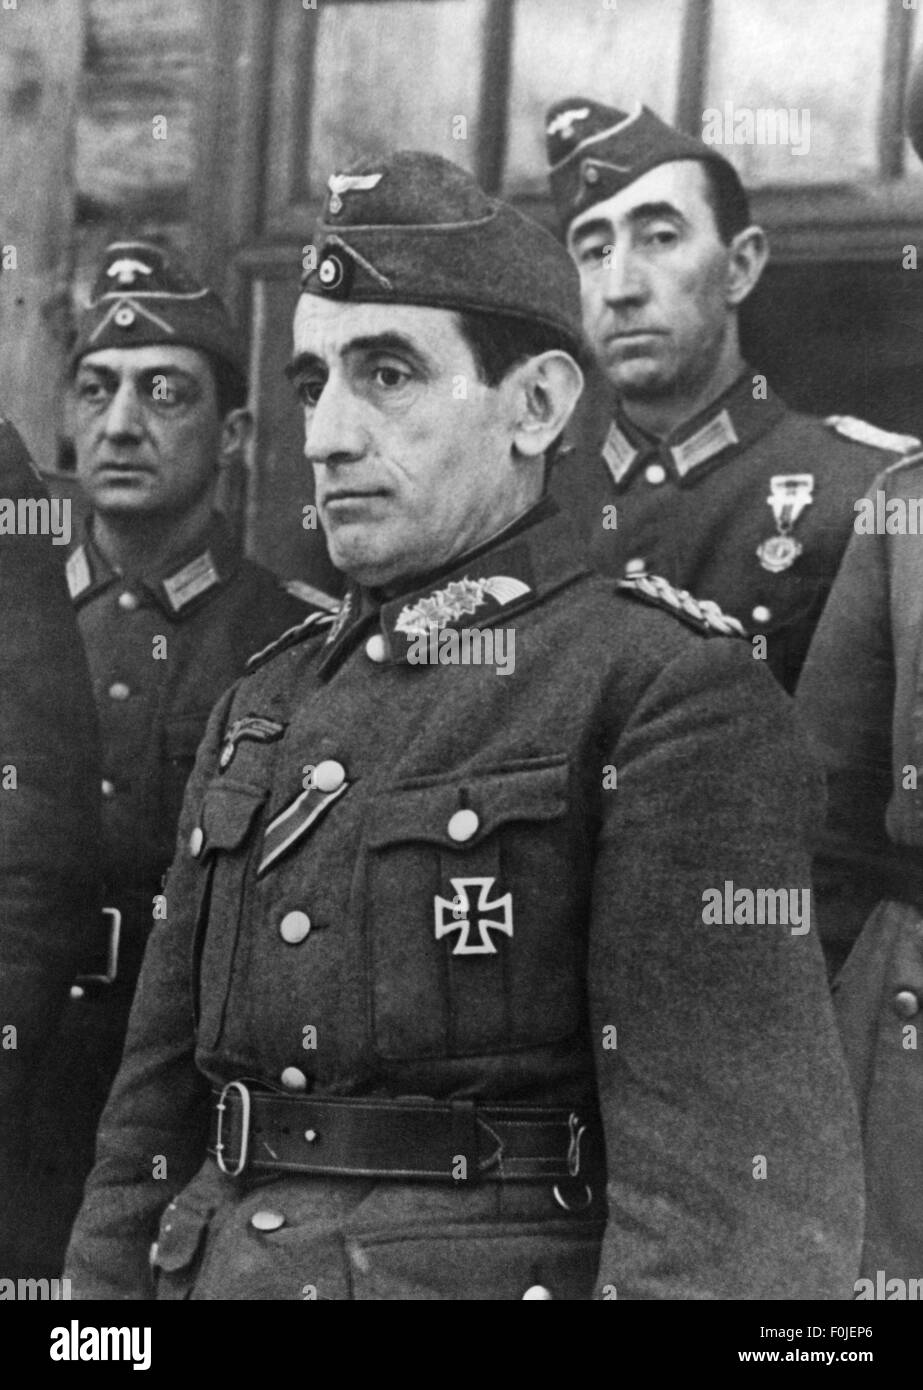 The Commander of the Spanish 'Blue Division', Agustin Munoz Grandes (left) was awarded with the Iron Cross 1st Class. During the Second World War, he fought at the German Eastern front. Stock Photo